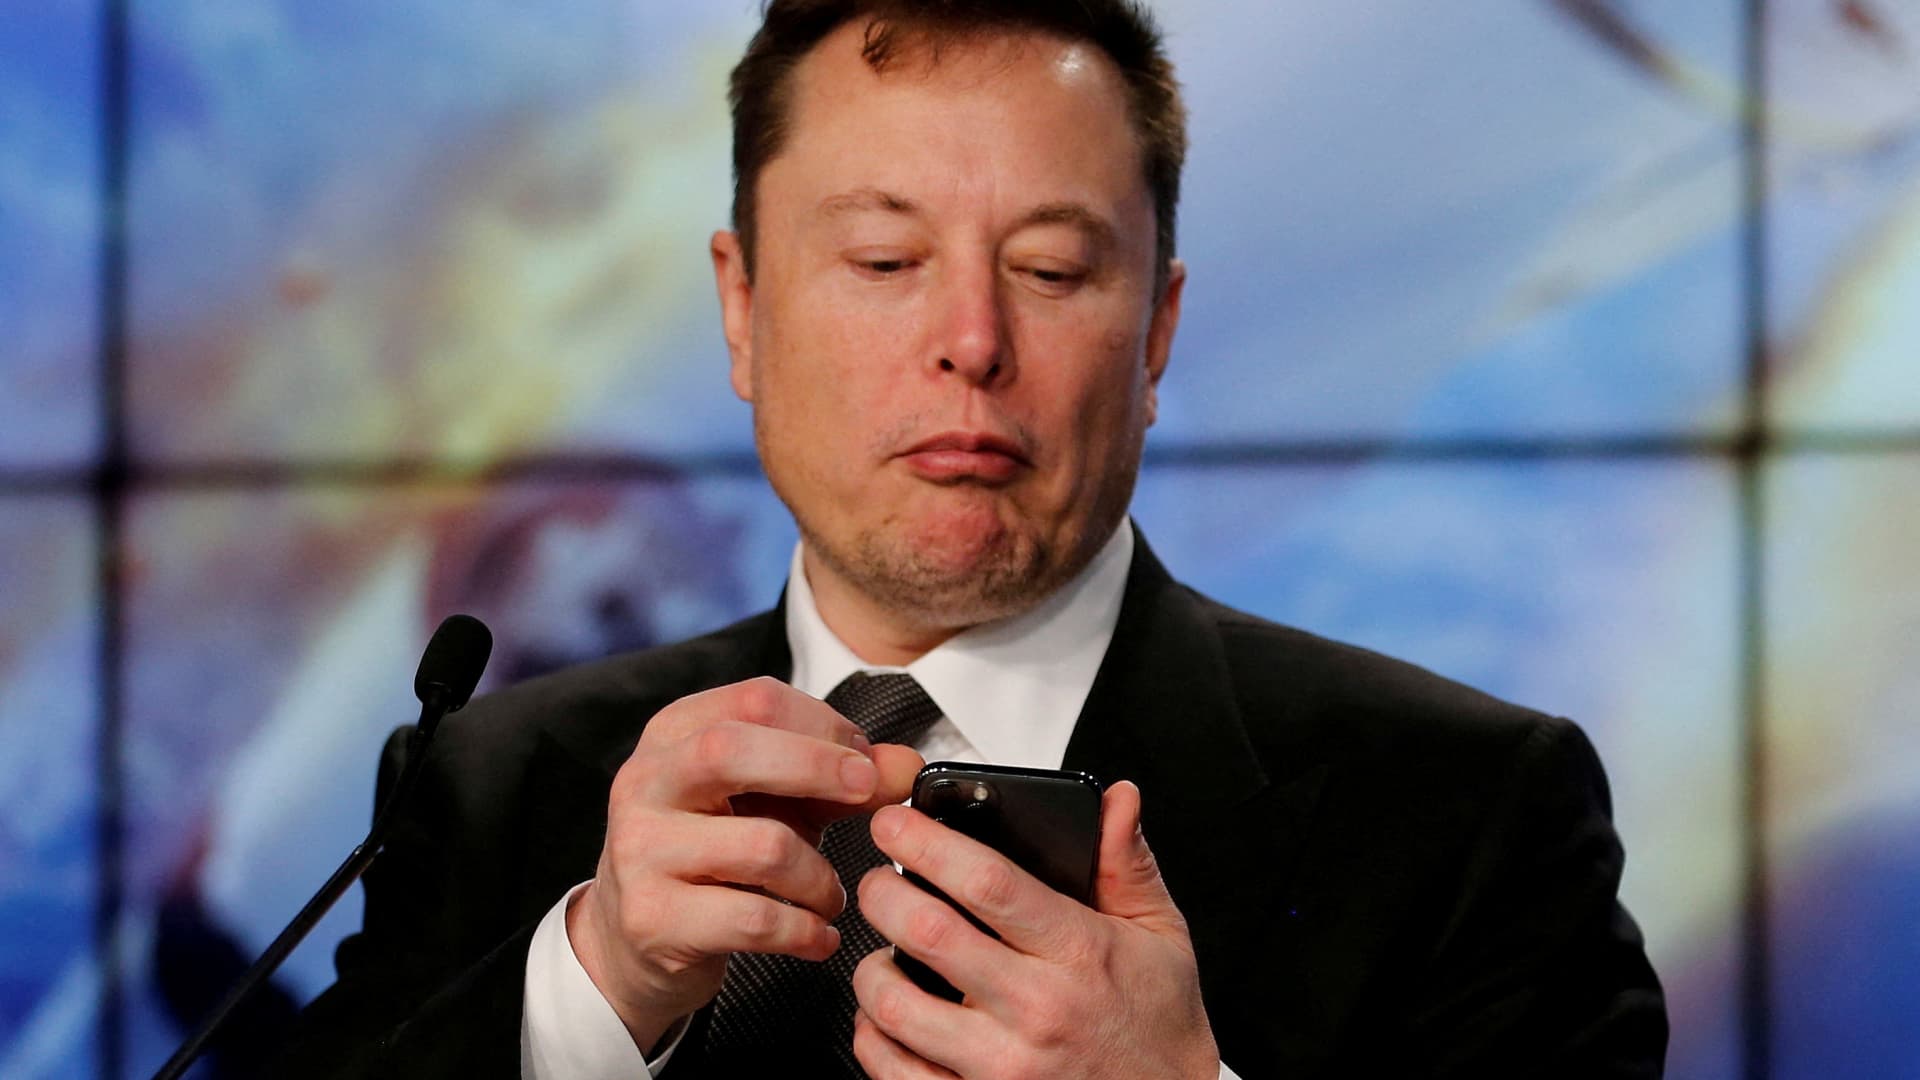 Elon Musk says Twitter deal 'cannot move forward' until he has clarity on fake account numbers